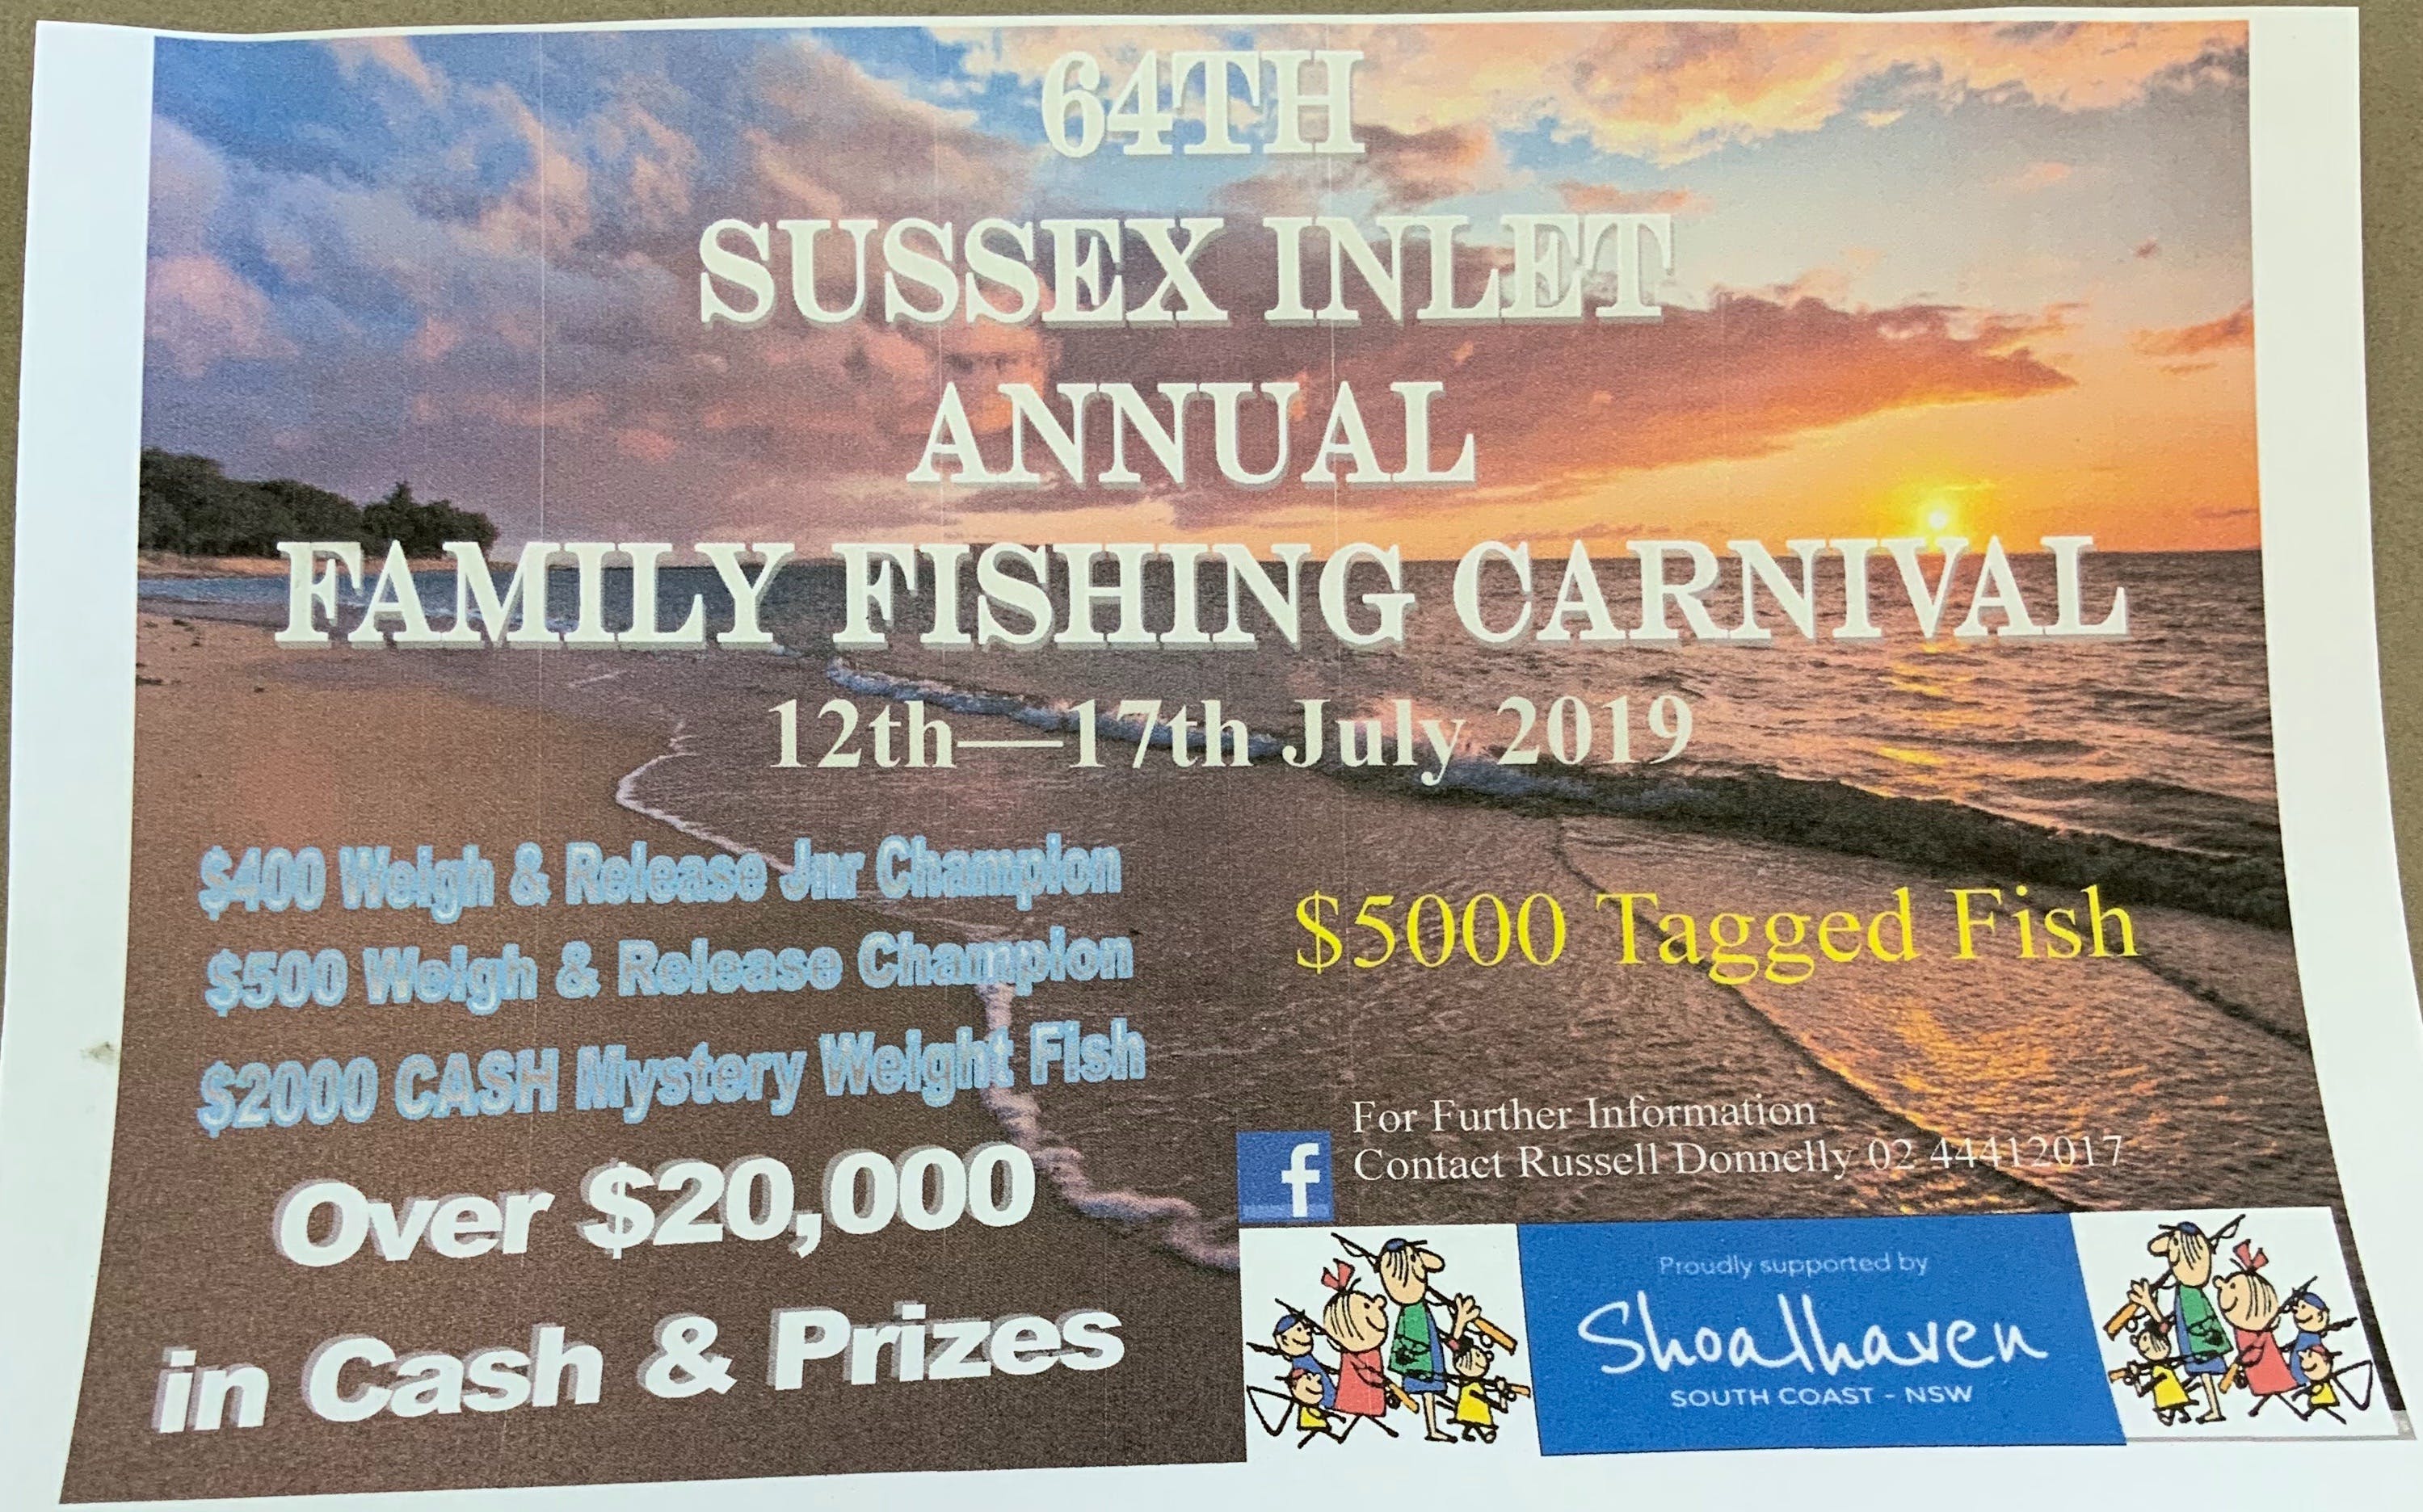 The Sussex Inlet Annual Family Fishing Carnival